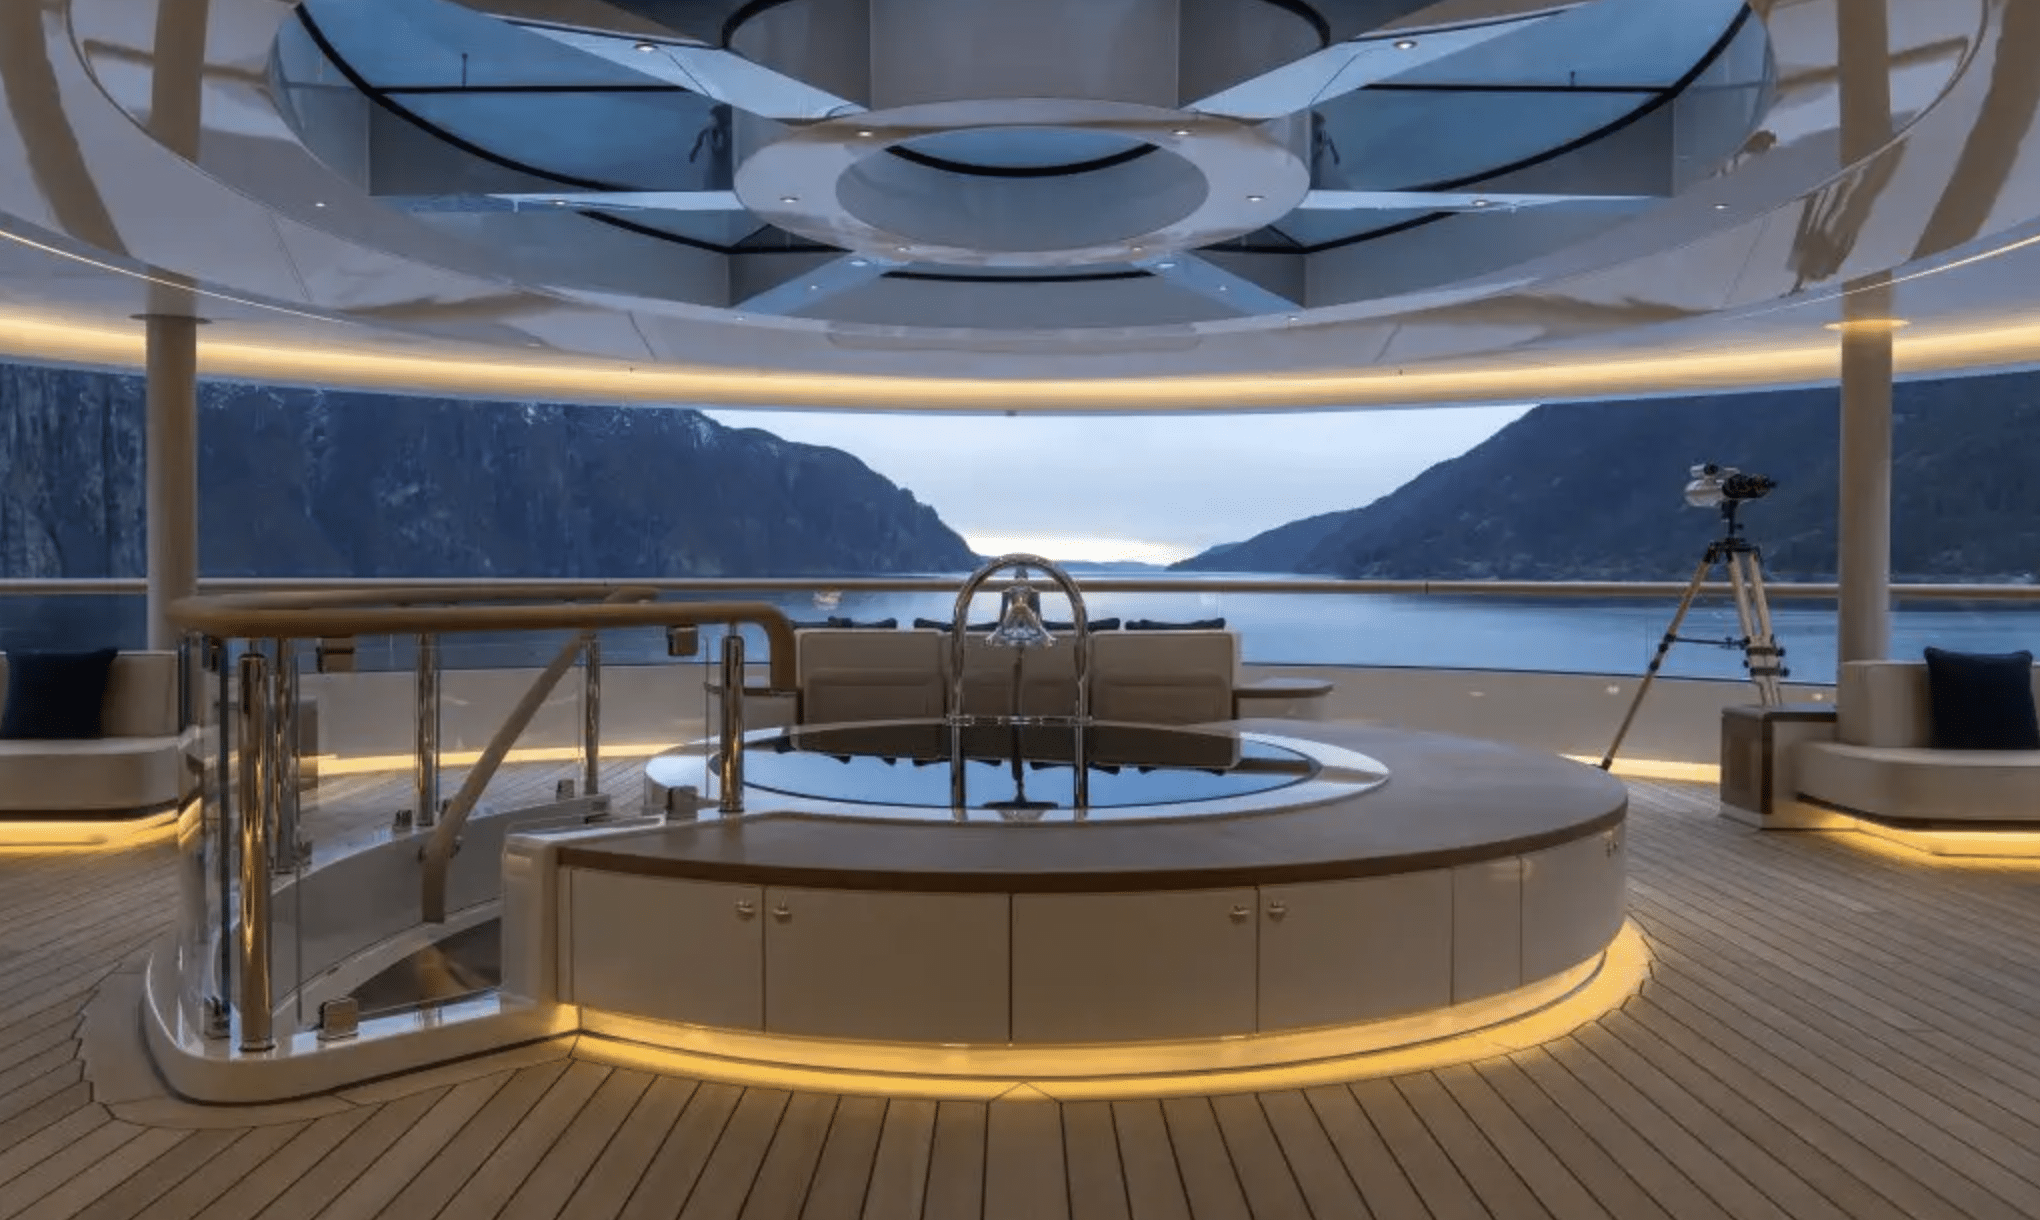 This is the superyacht Jay-Z and Beyoncé are vacationing on